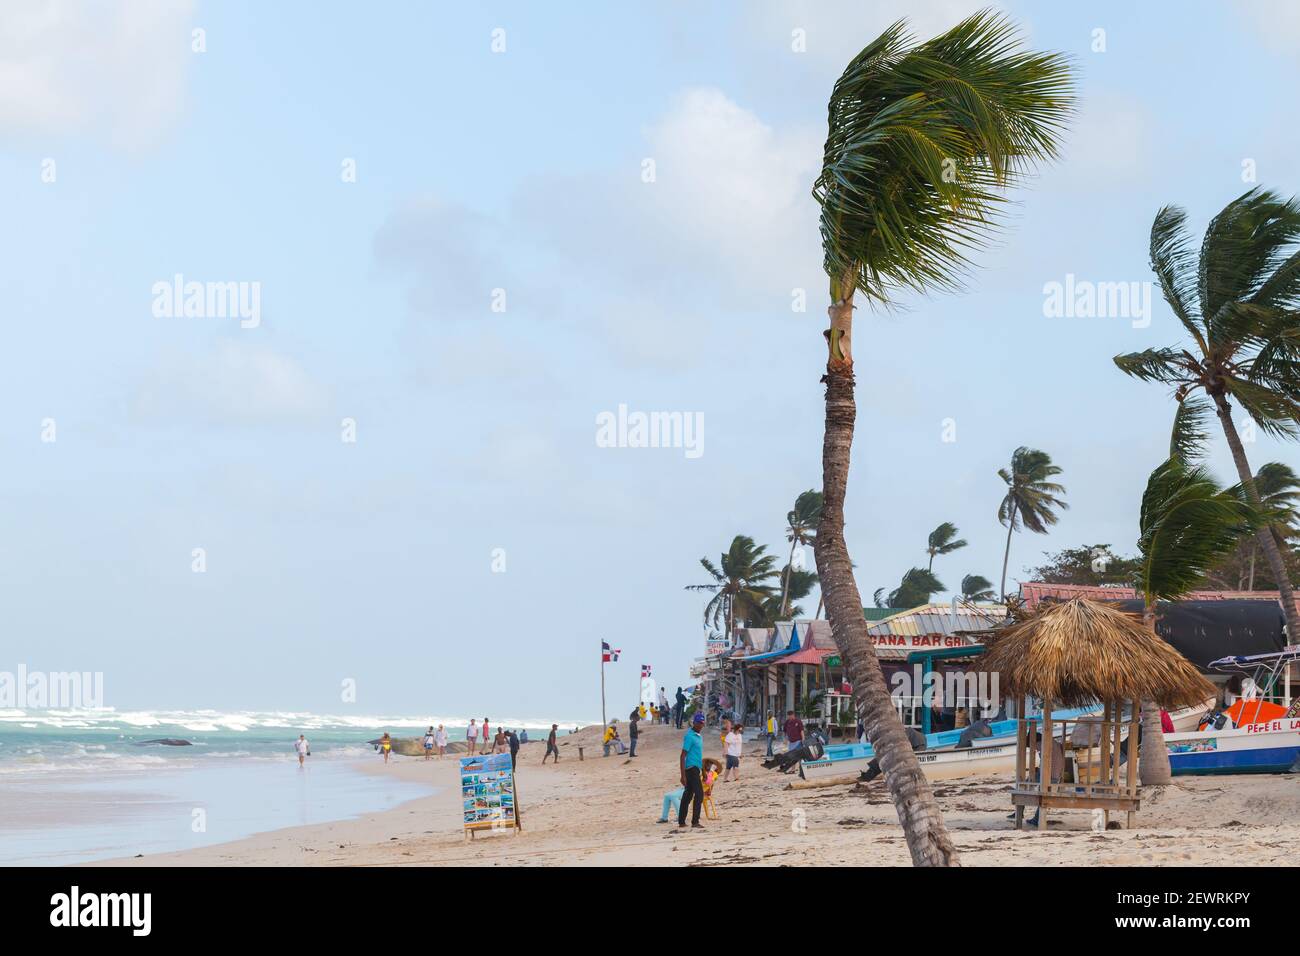 Punta Cana, Dominican republic - January 14, 2020: Tourists are on the beach of Punta Cana resort near small souvenir shops and restaurants Stock Photo